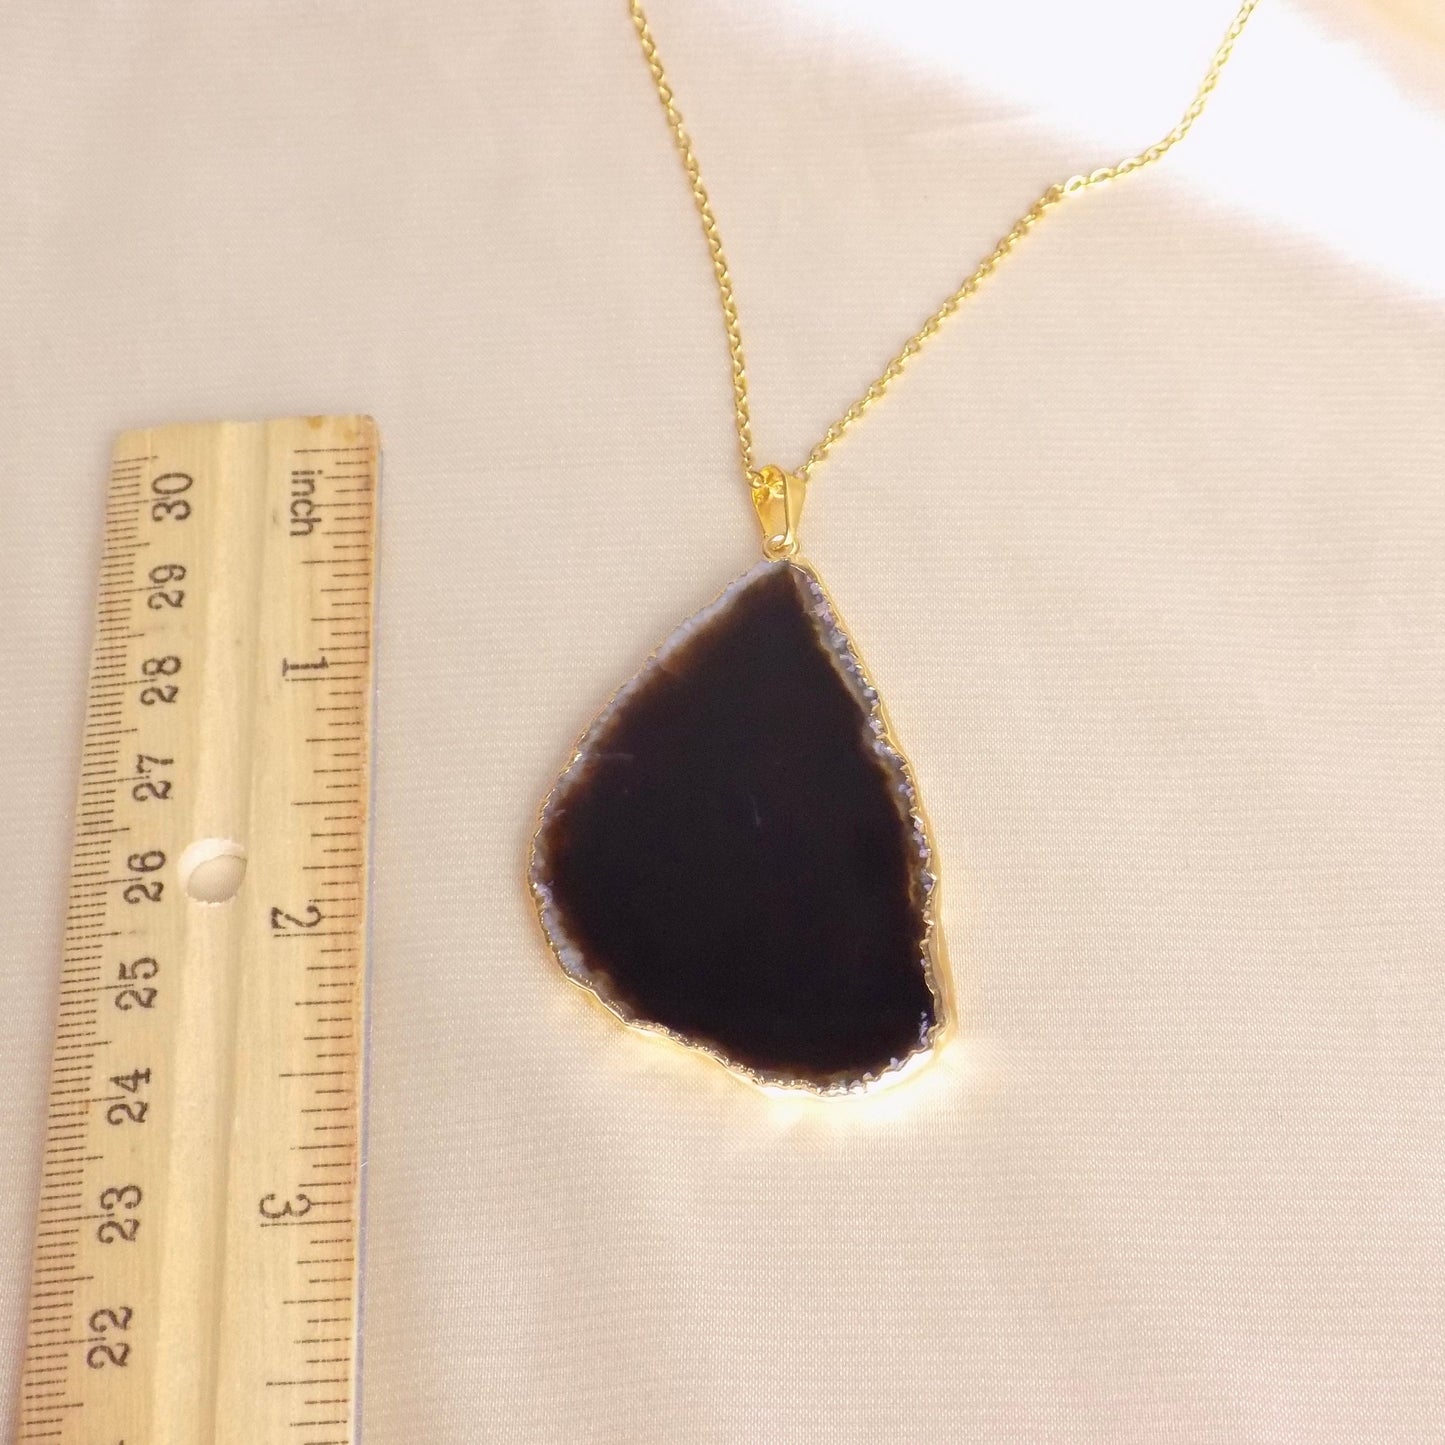 Unique Black Agate Slice Necklace Gold, Long Pendant Necklaces Women's, Gifts For Mom, G15-92